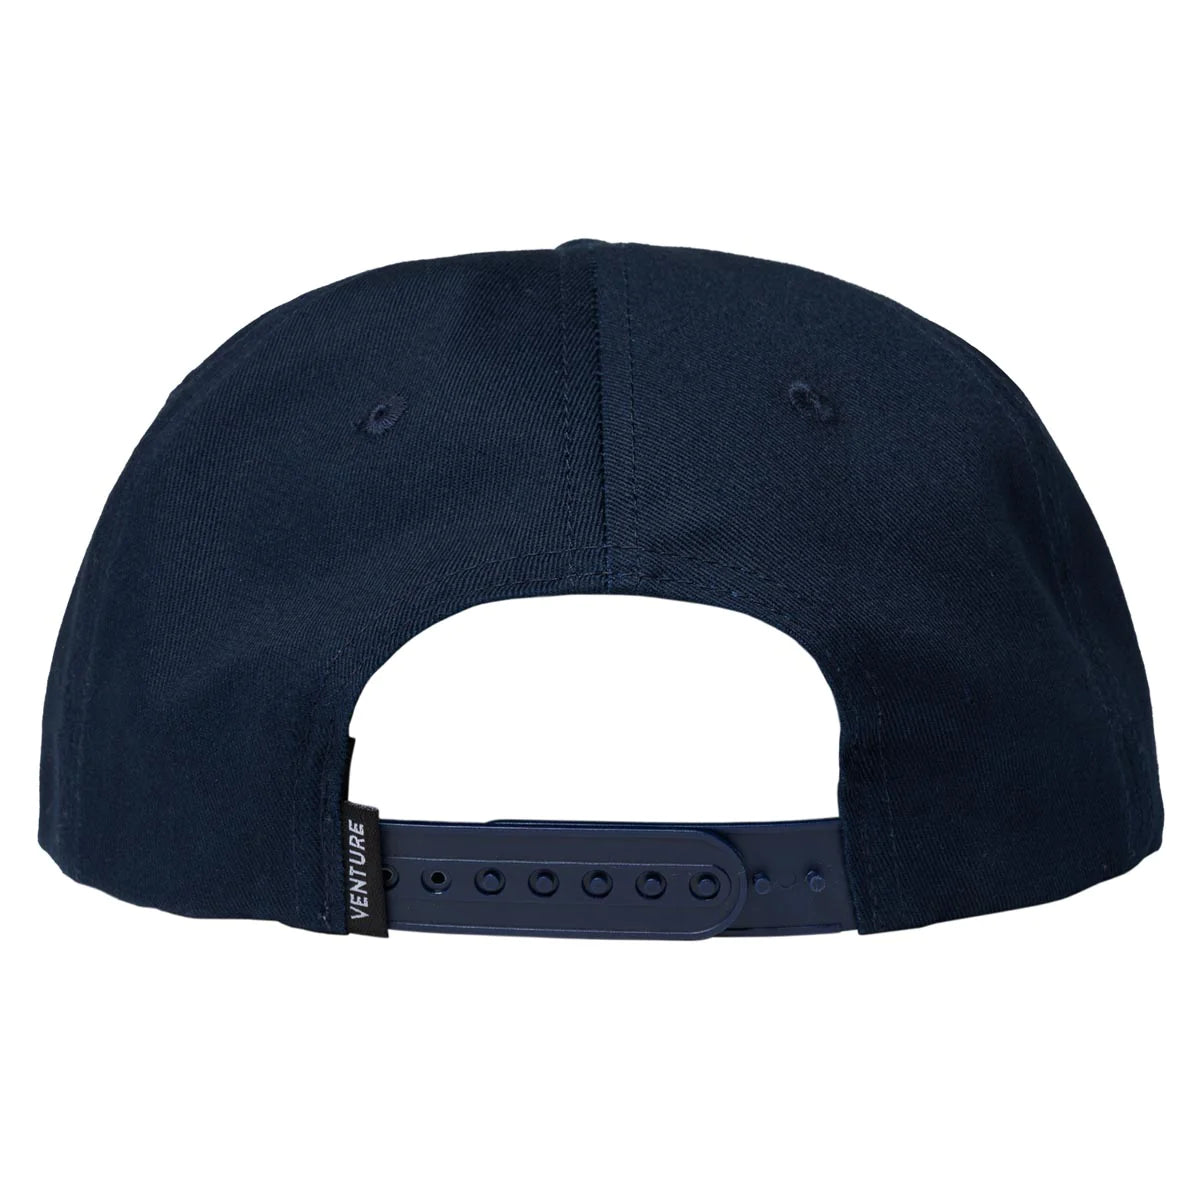 Venture Throw Snap Back Hat - Navy / Red